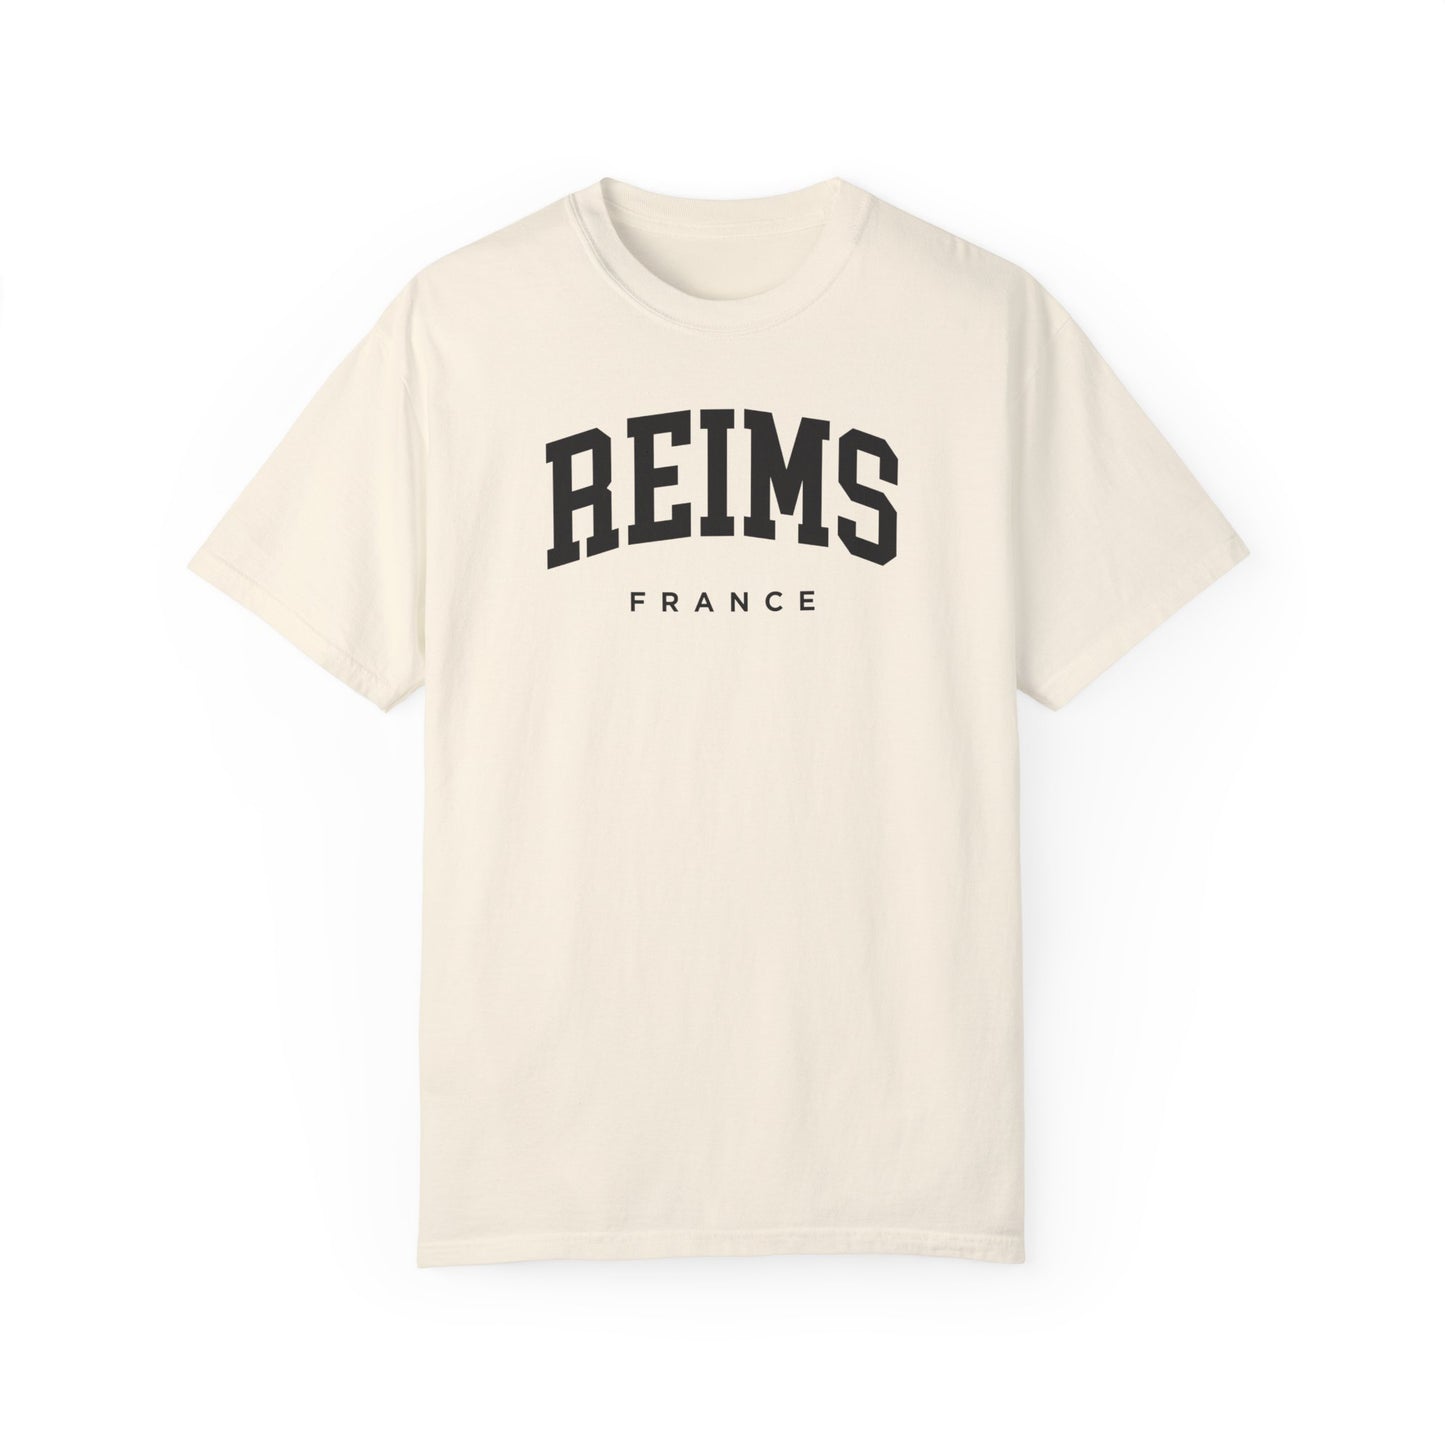 Reims France Comfort Colors® Tee